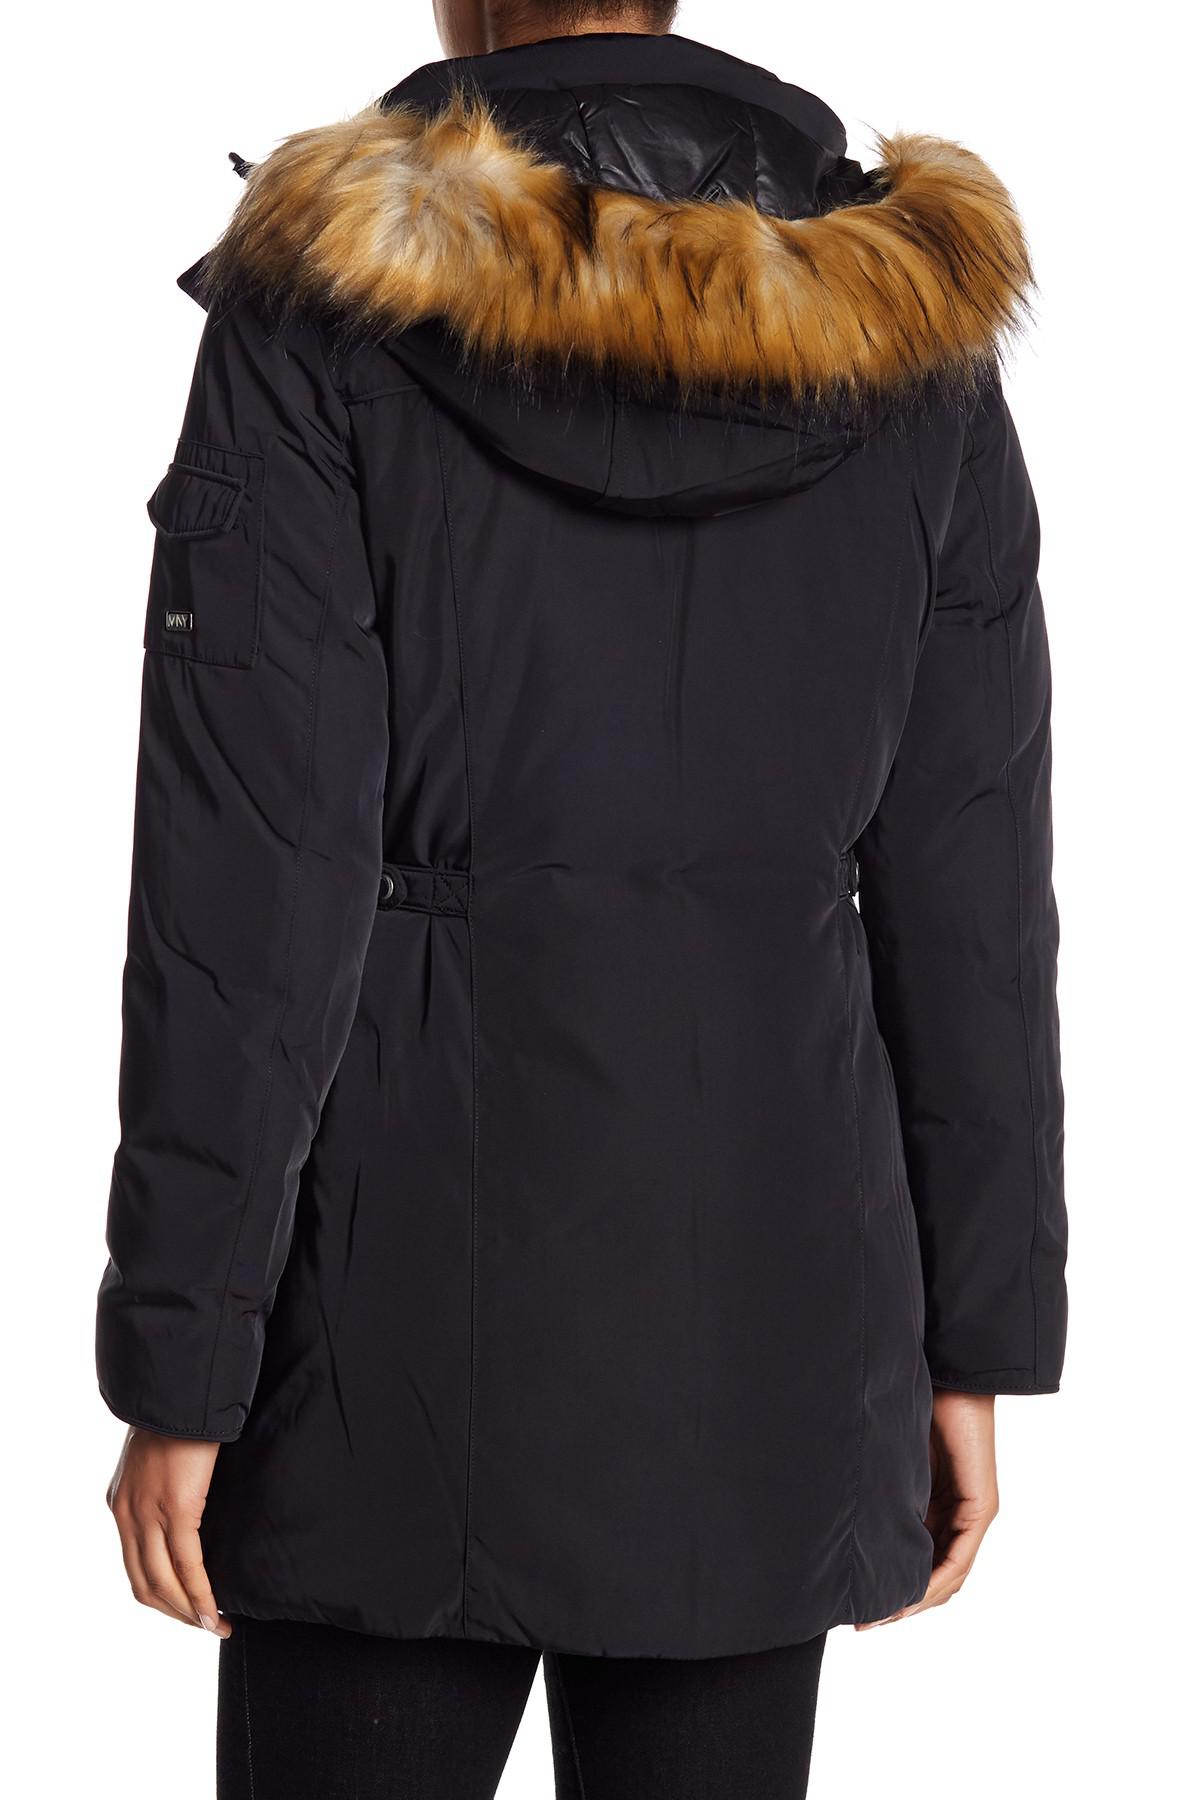 Andrew Marc Synthetic Willow Faux Fur Trim Parka in Black - Lyst